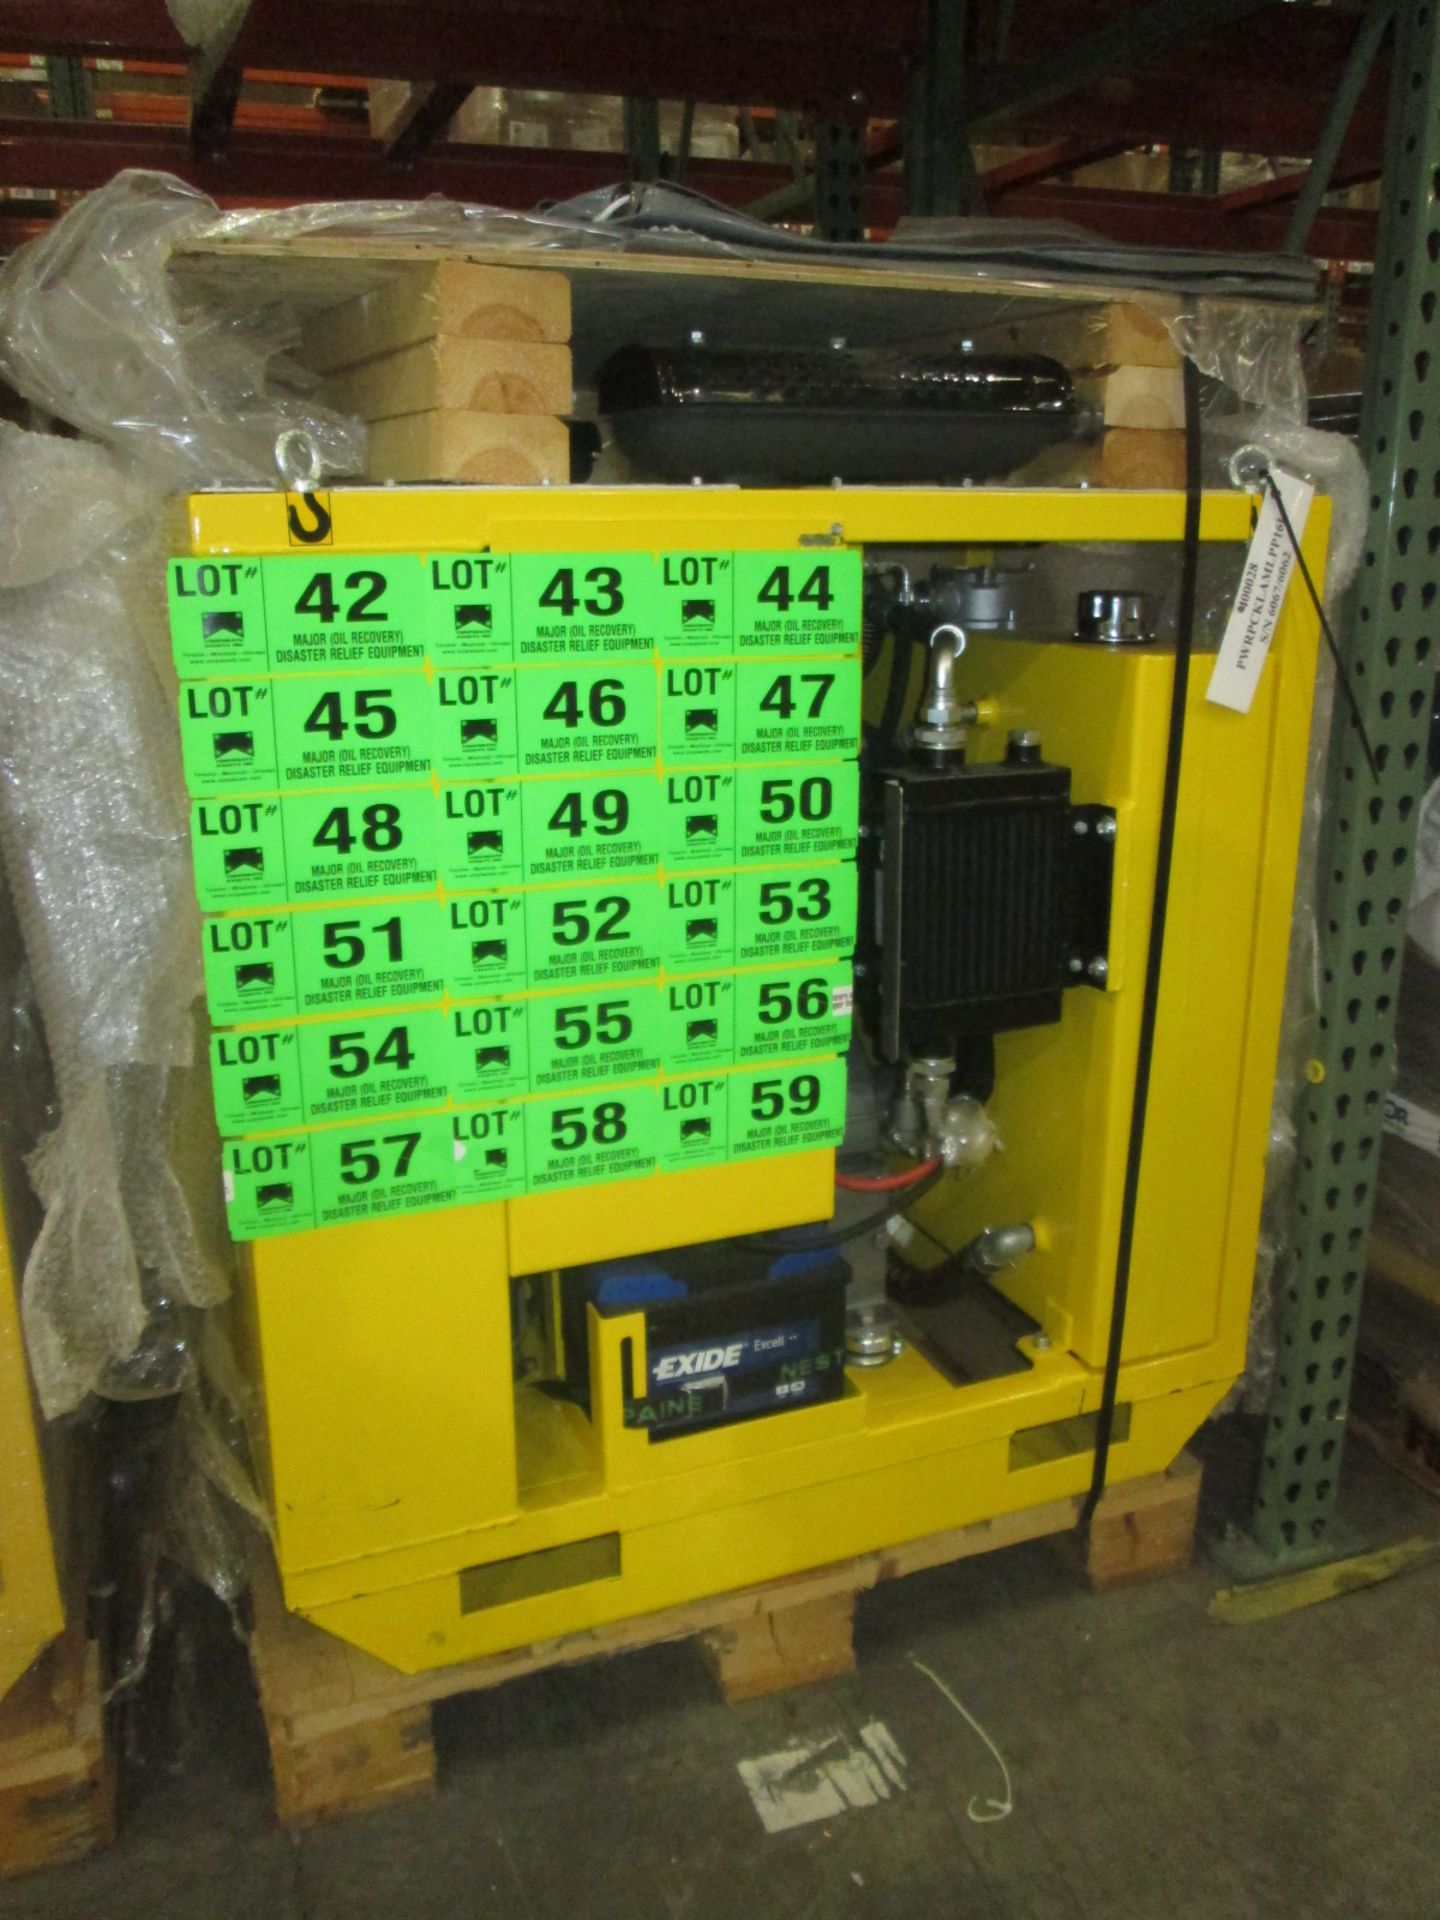 LAMOR SLICKBAR LPP 16L ENCLOSED HYDRAULIC POWER PACK WITH 22 HP LOMBARDINI DIESEL ENGINE AND